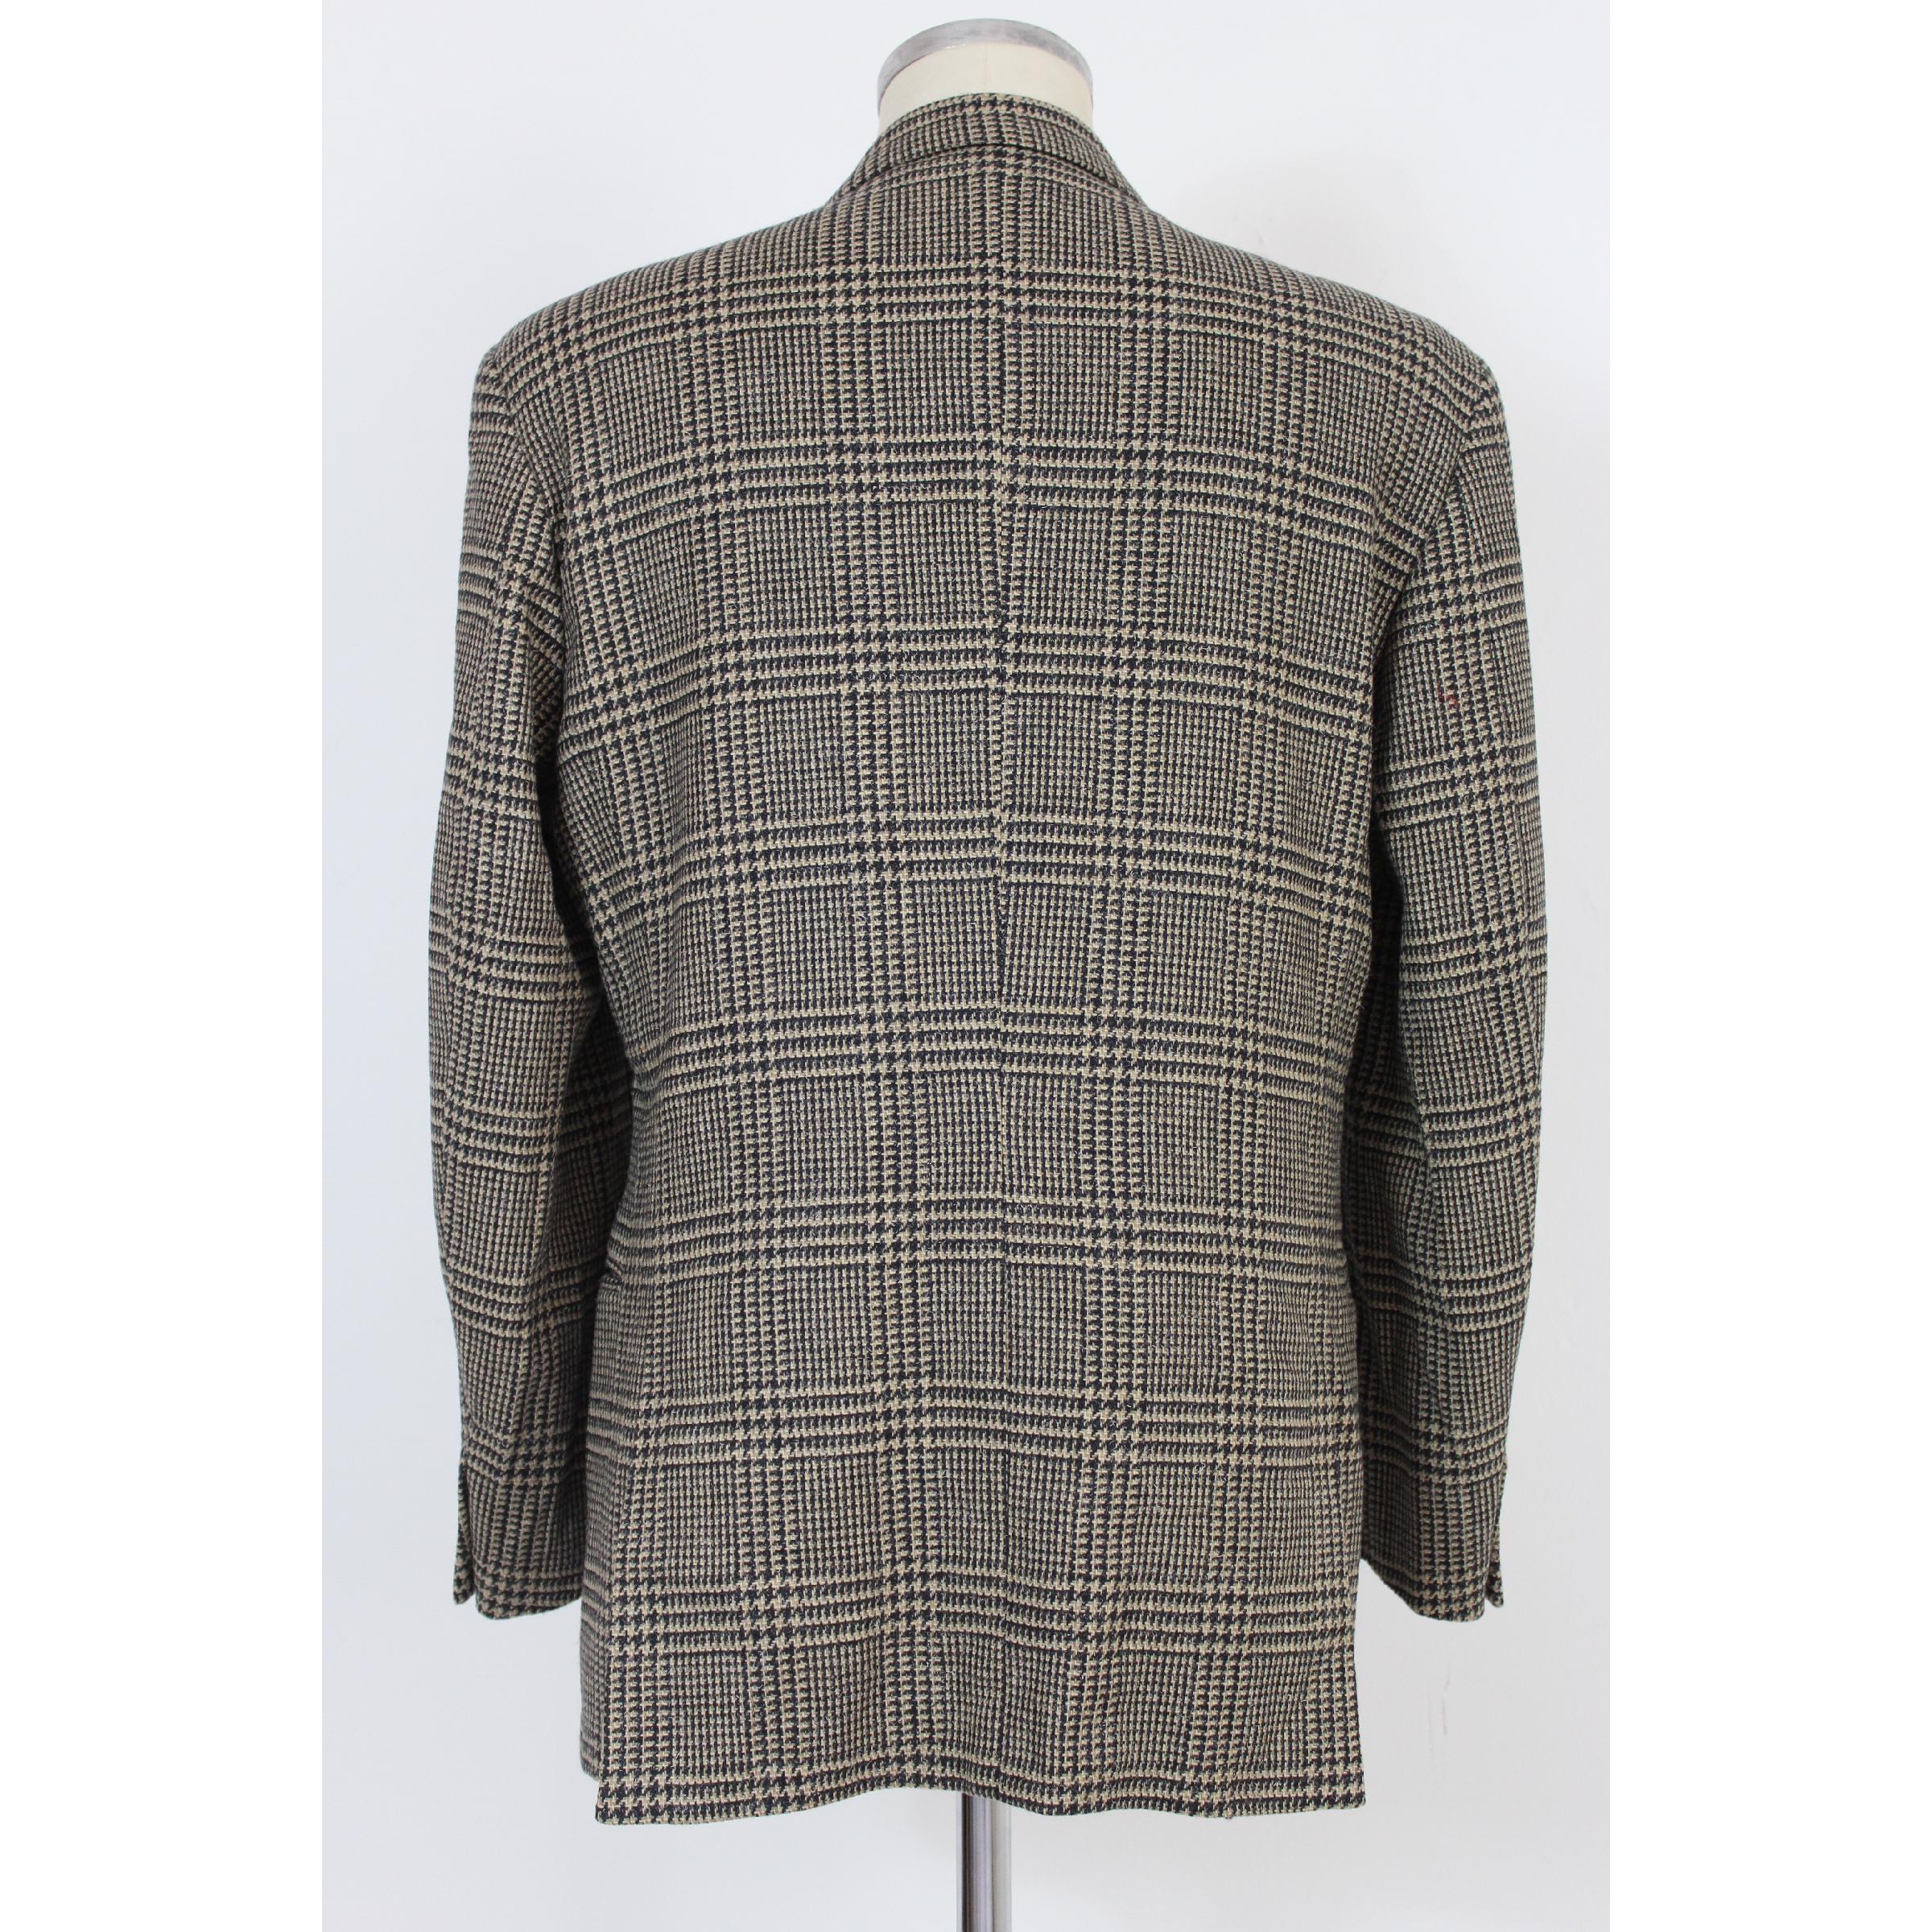 Fendi 90s vintage men's jacket. Beige and brown tweed color, 100% wool. Classic three-button model, inner lining. Made in Italy. Excellent vintage condition. 

Size: 48 It 38 Us 38 Uk 

Shoulder: 48 cm 
Bust/Chest: 56 cm 
Sleeve: 62 cm 
Length: 84 cm